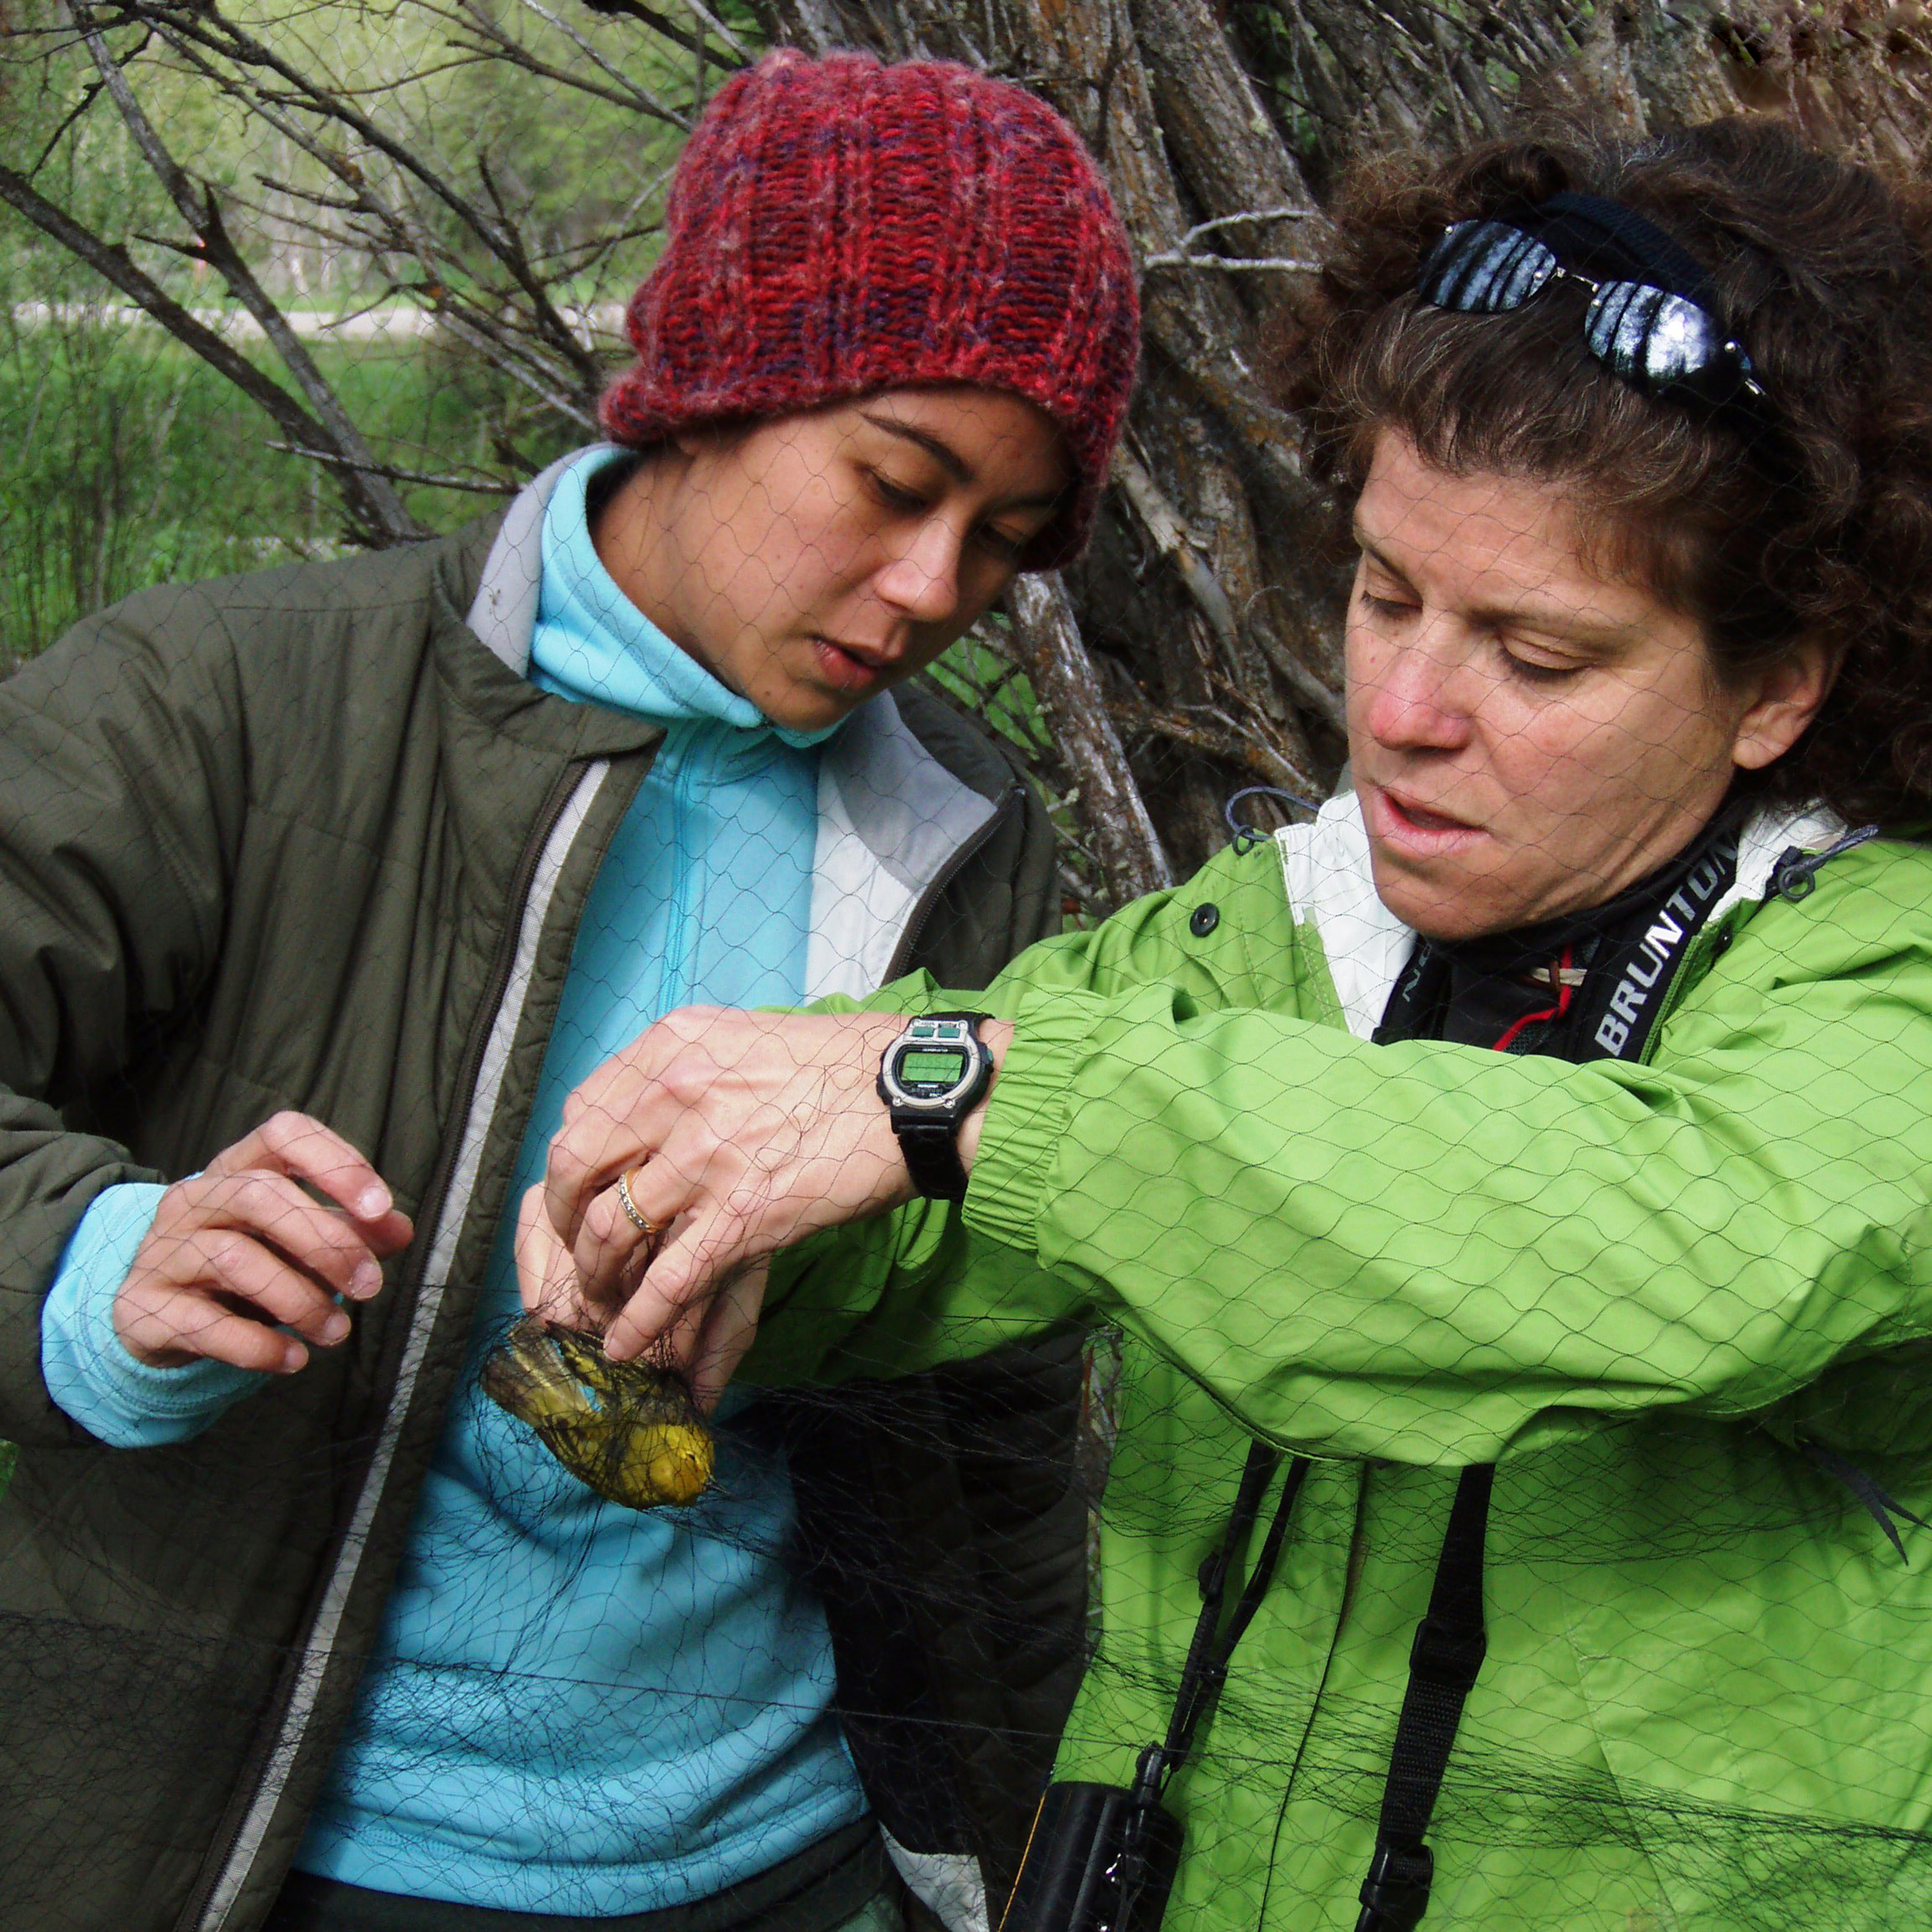 Find out how an Earthwatch expedition can help teachers, teens, and school groups connect with nature through hands-on science and cooperative conservation, or learn how to apply for one of our student or teacher fellowships. 